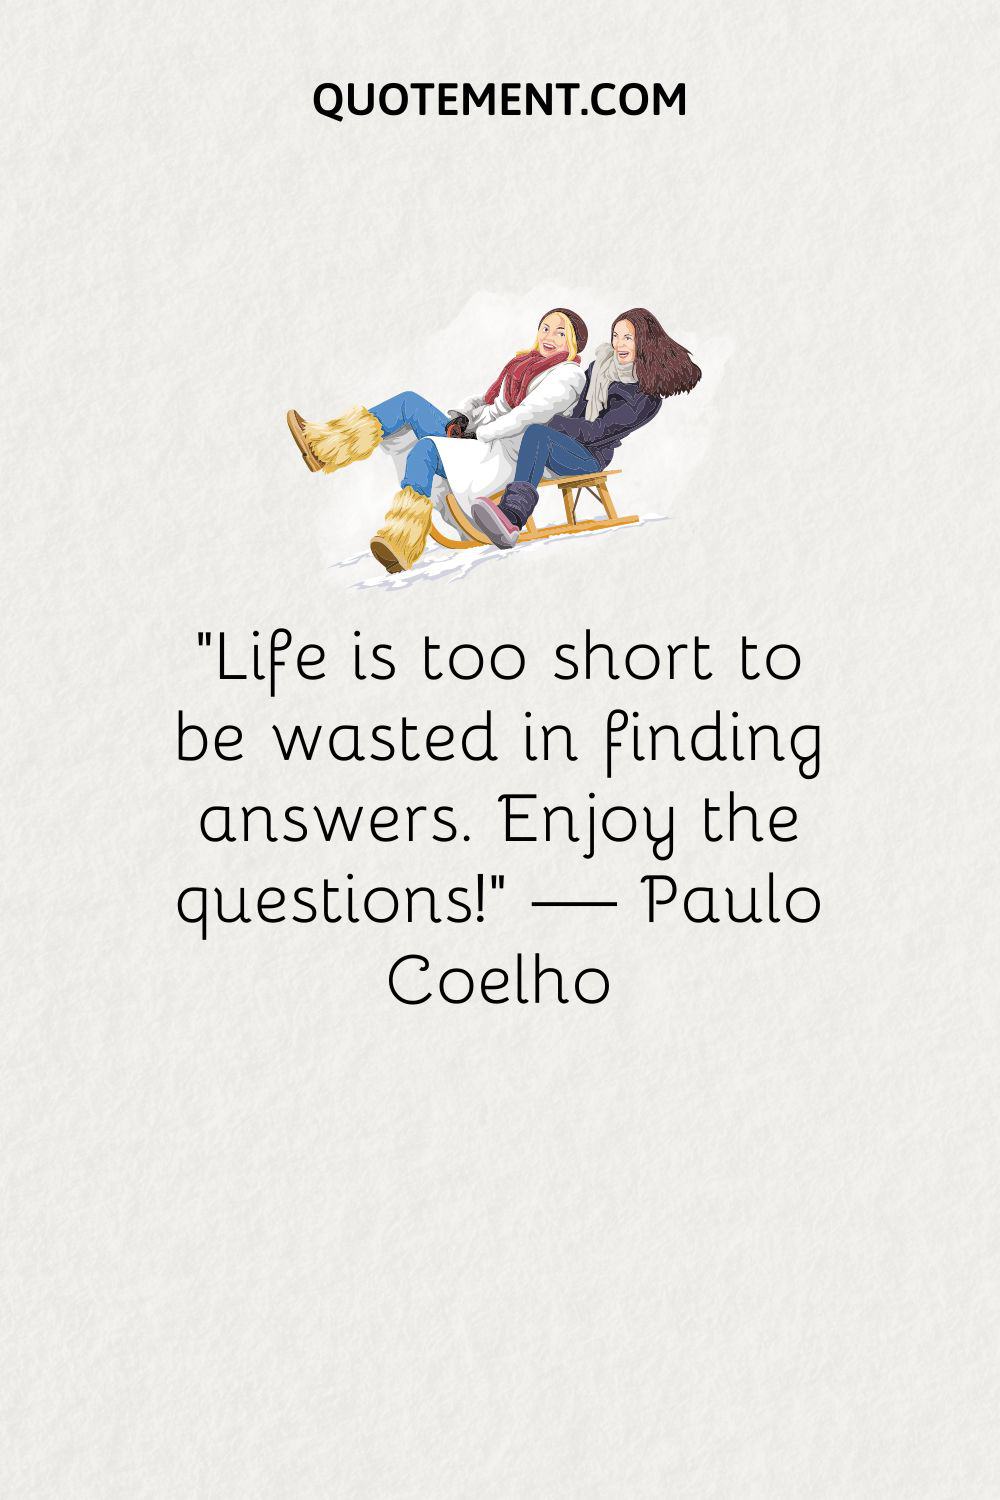 “Life is too short to be wasted in finding answers. Enjoy the questions!” — Paulo Coelho